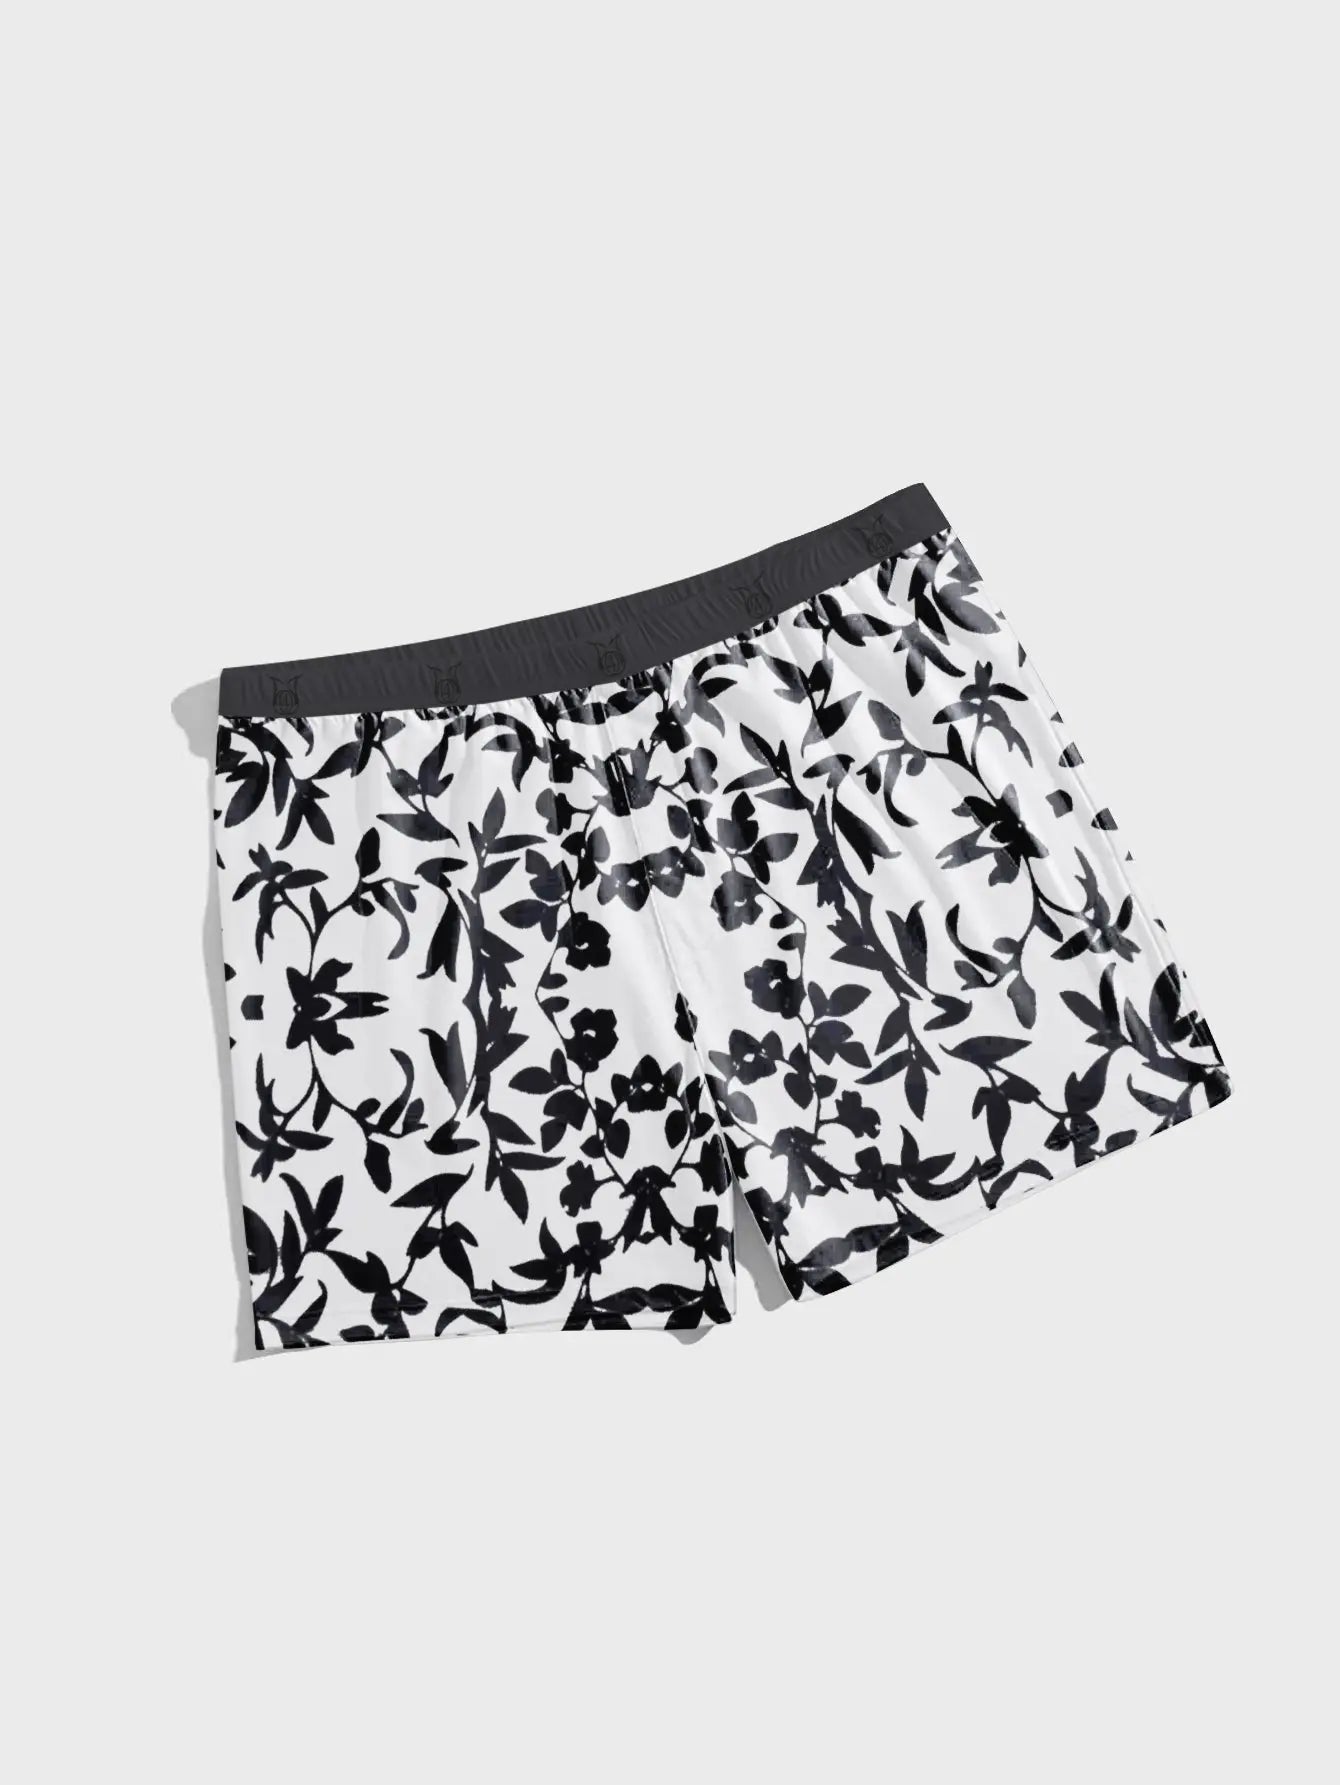 Thread 4 Thought Single Jersey Boxer Short For Men-White with Allover Floral Print-BE18336 M-17